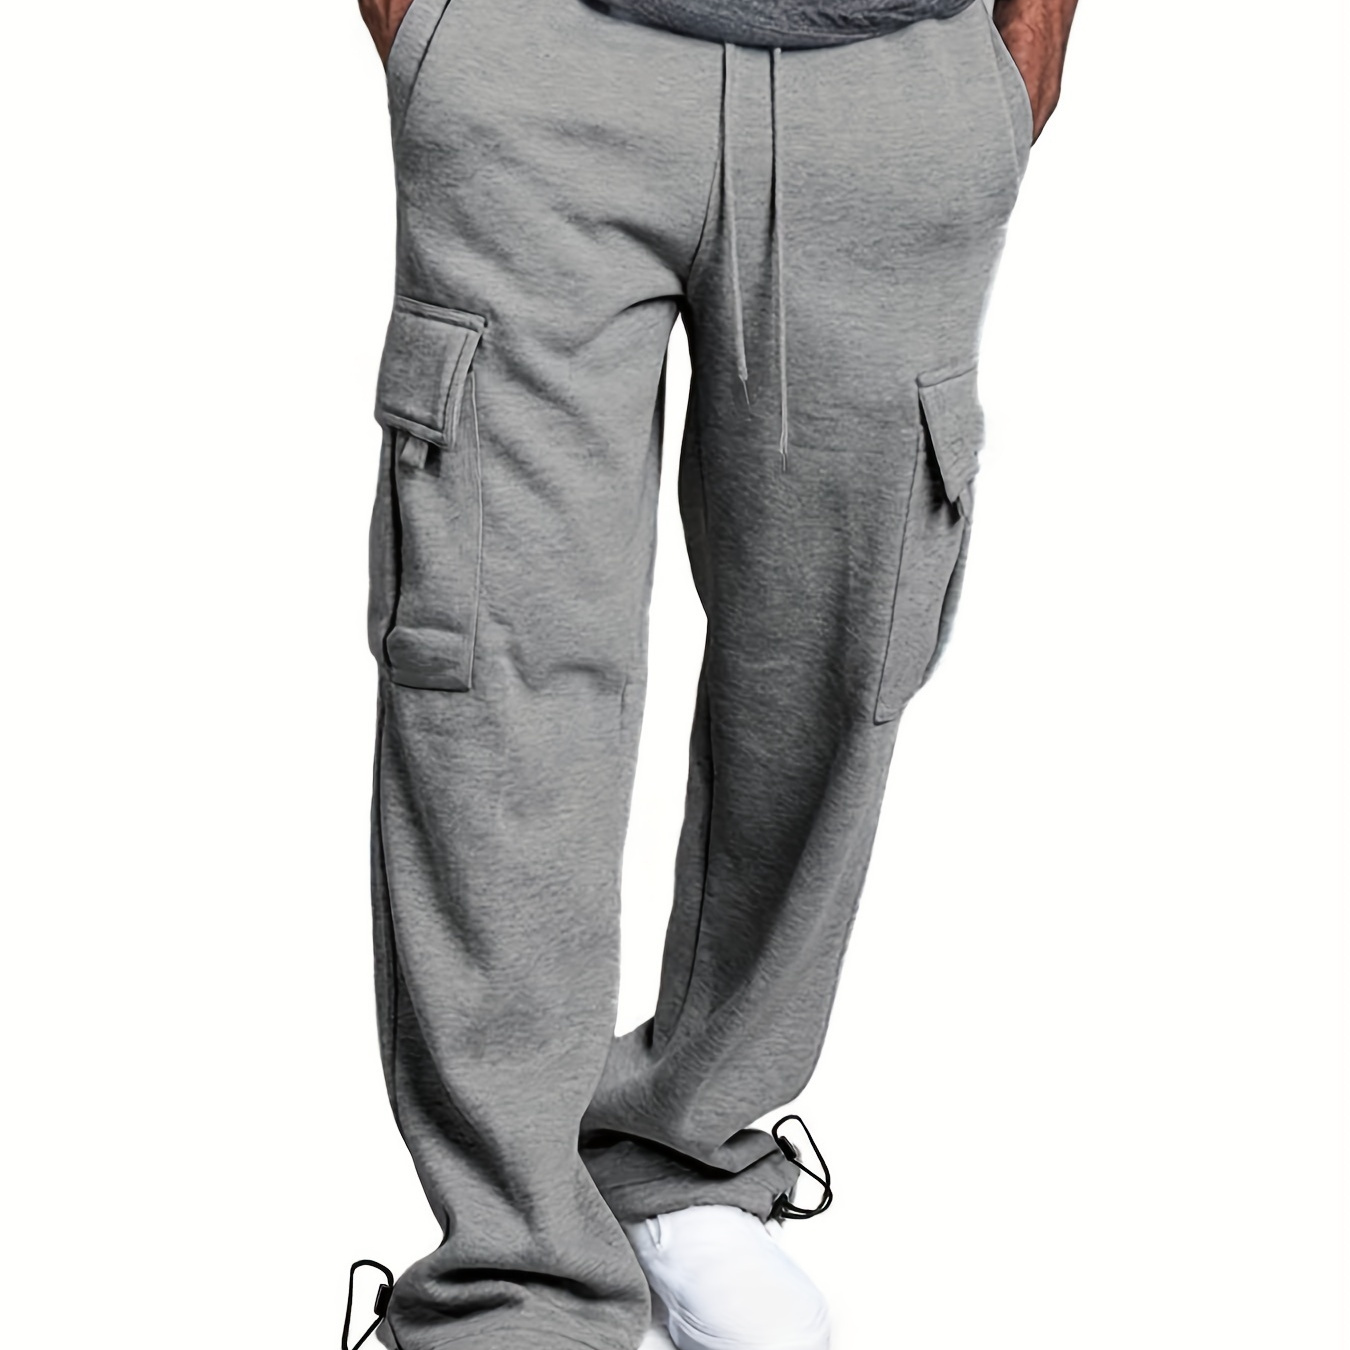 

Men's Loose Fit Baggy Sweatpants With Drawstring And Flap Pockets, Solid Warm And Comfy Trousers With Fleece For Winter Outdoors Wear